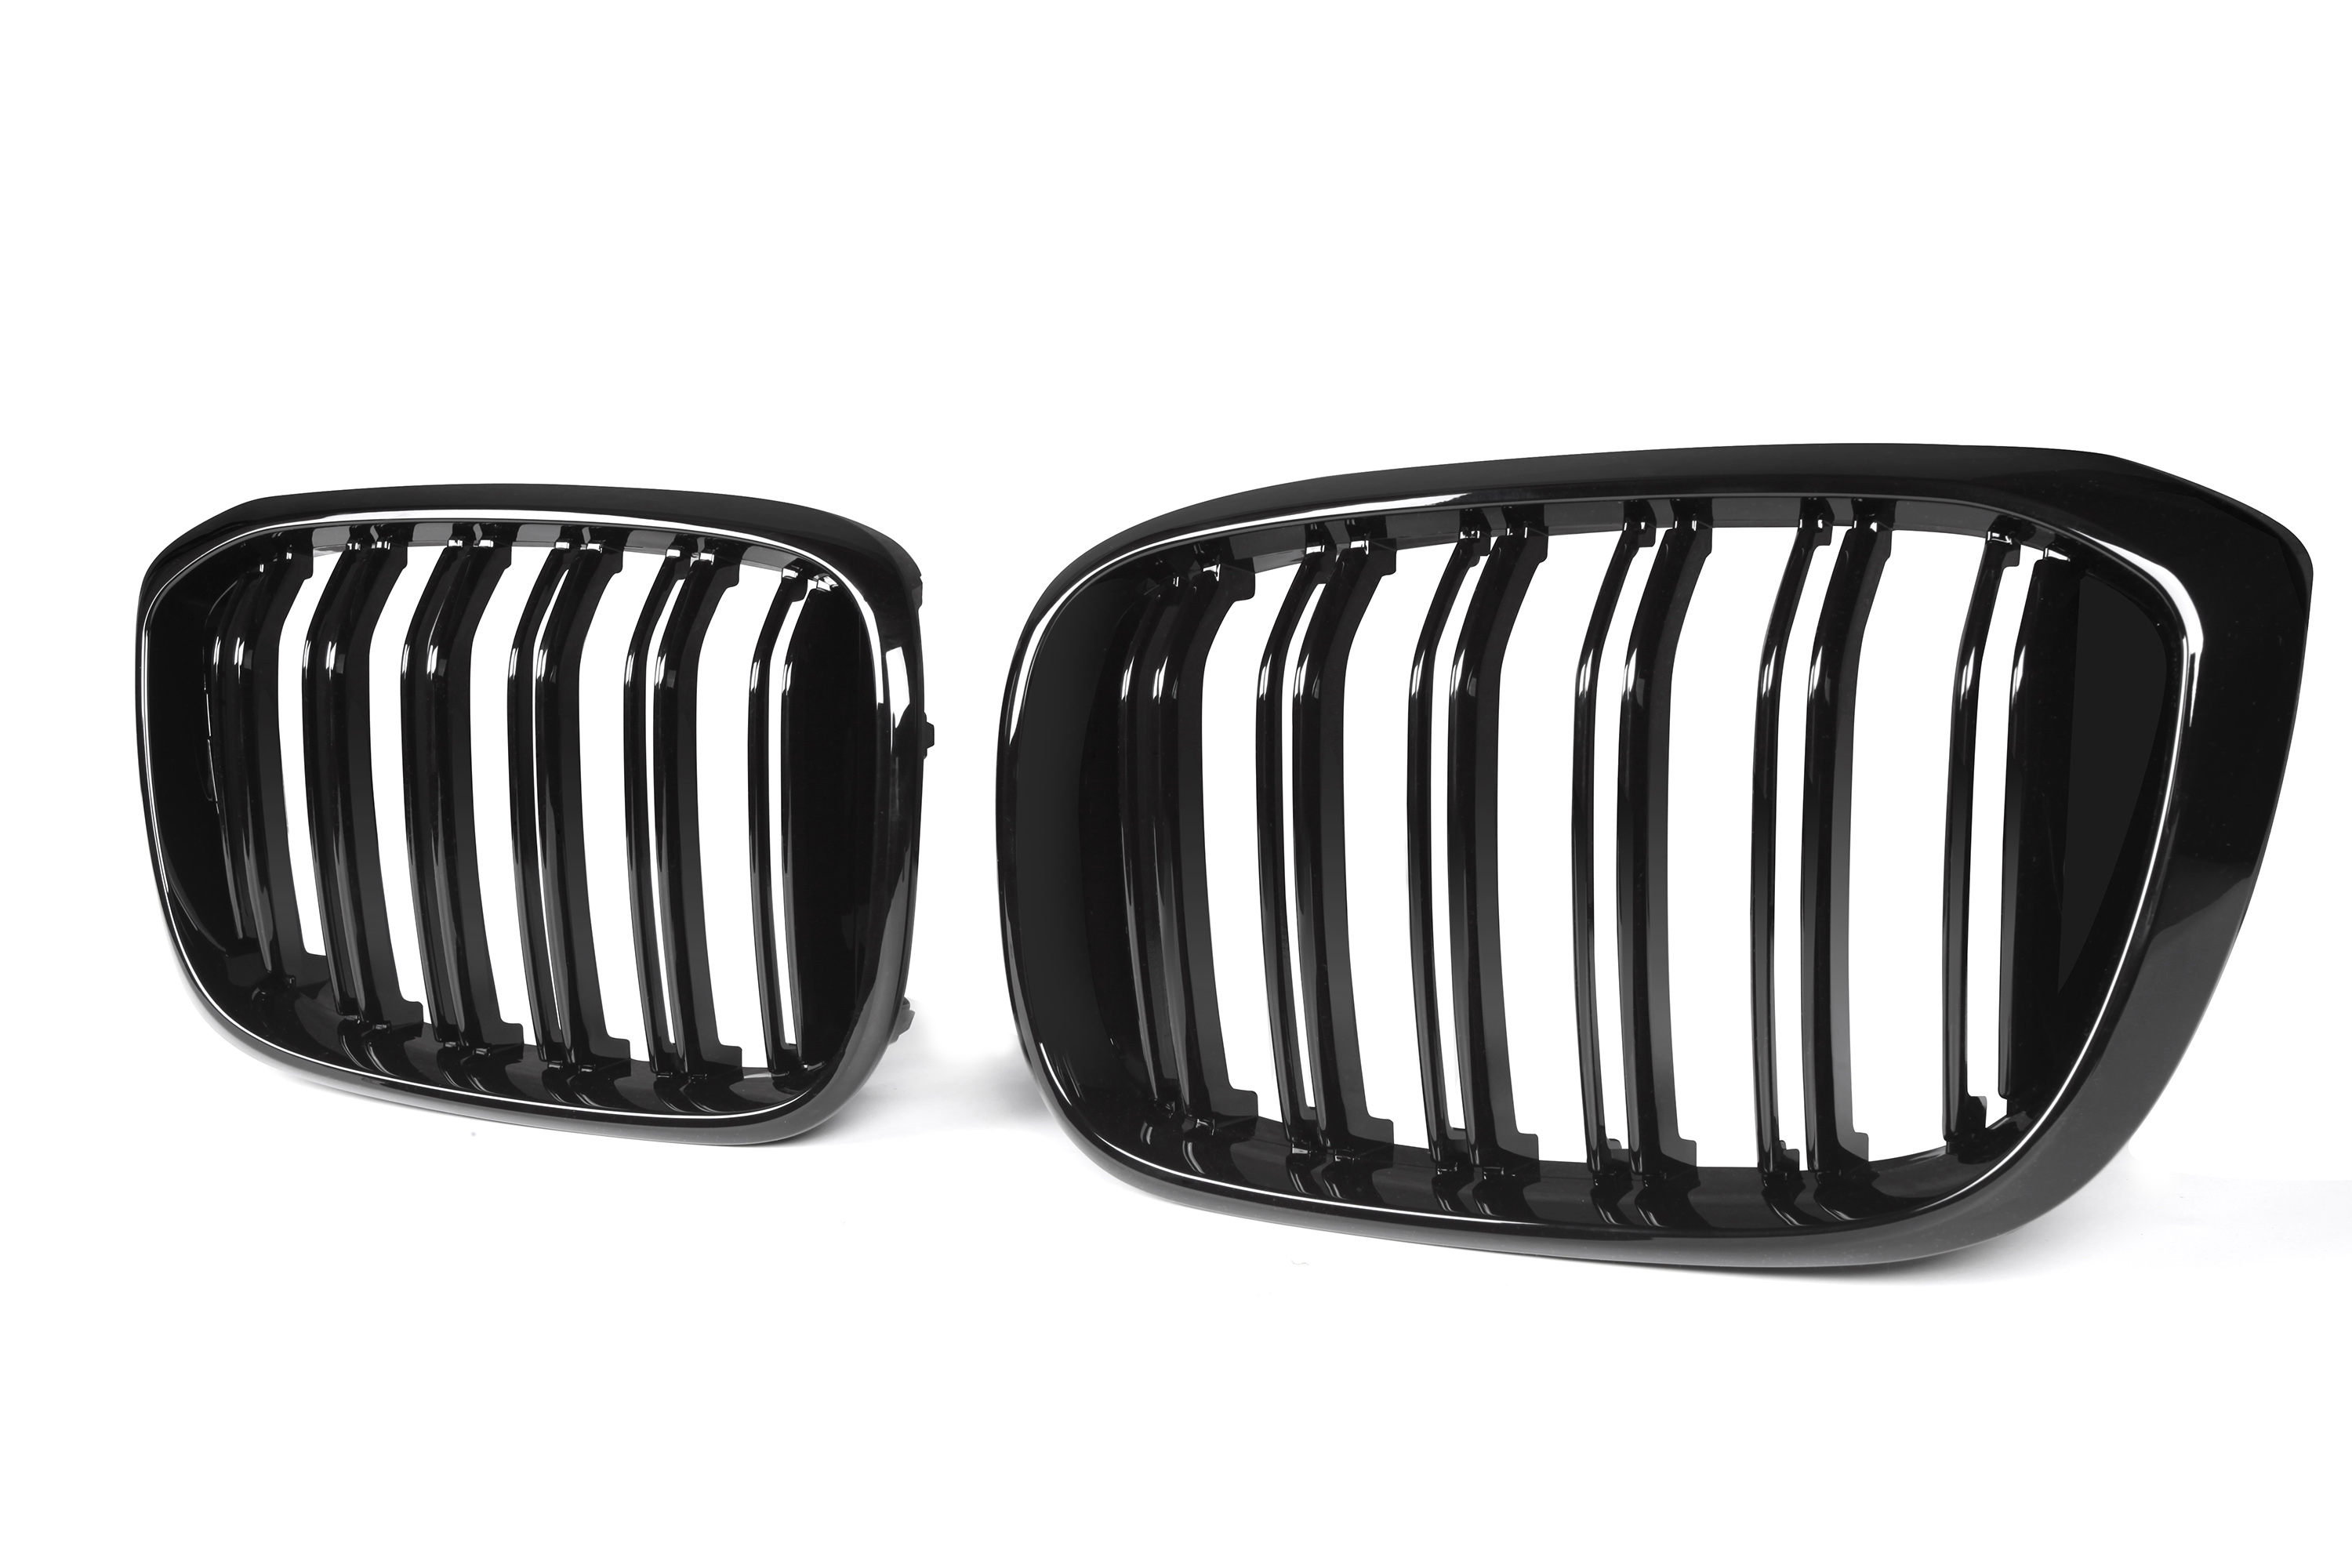 Zero Offset  M Performance Style Gloss Black Grill (Dual Slat) For BMW X3/X4 G01/G02 18-21 - MODE Auto Concepts